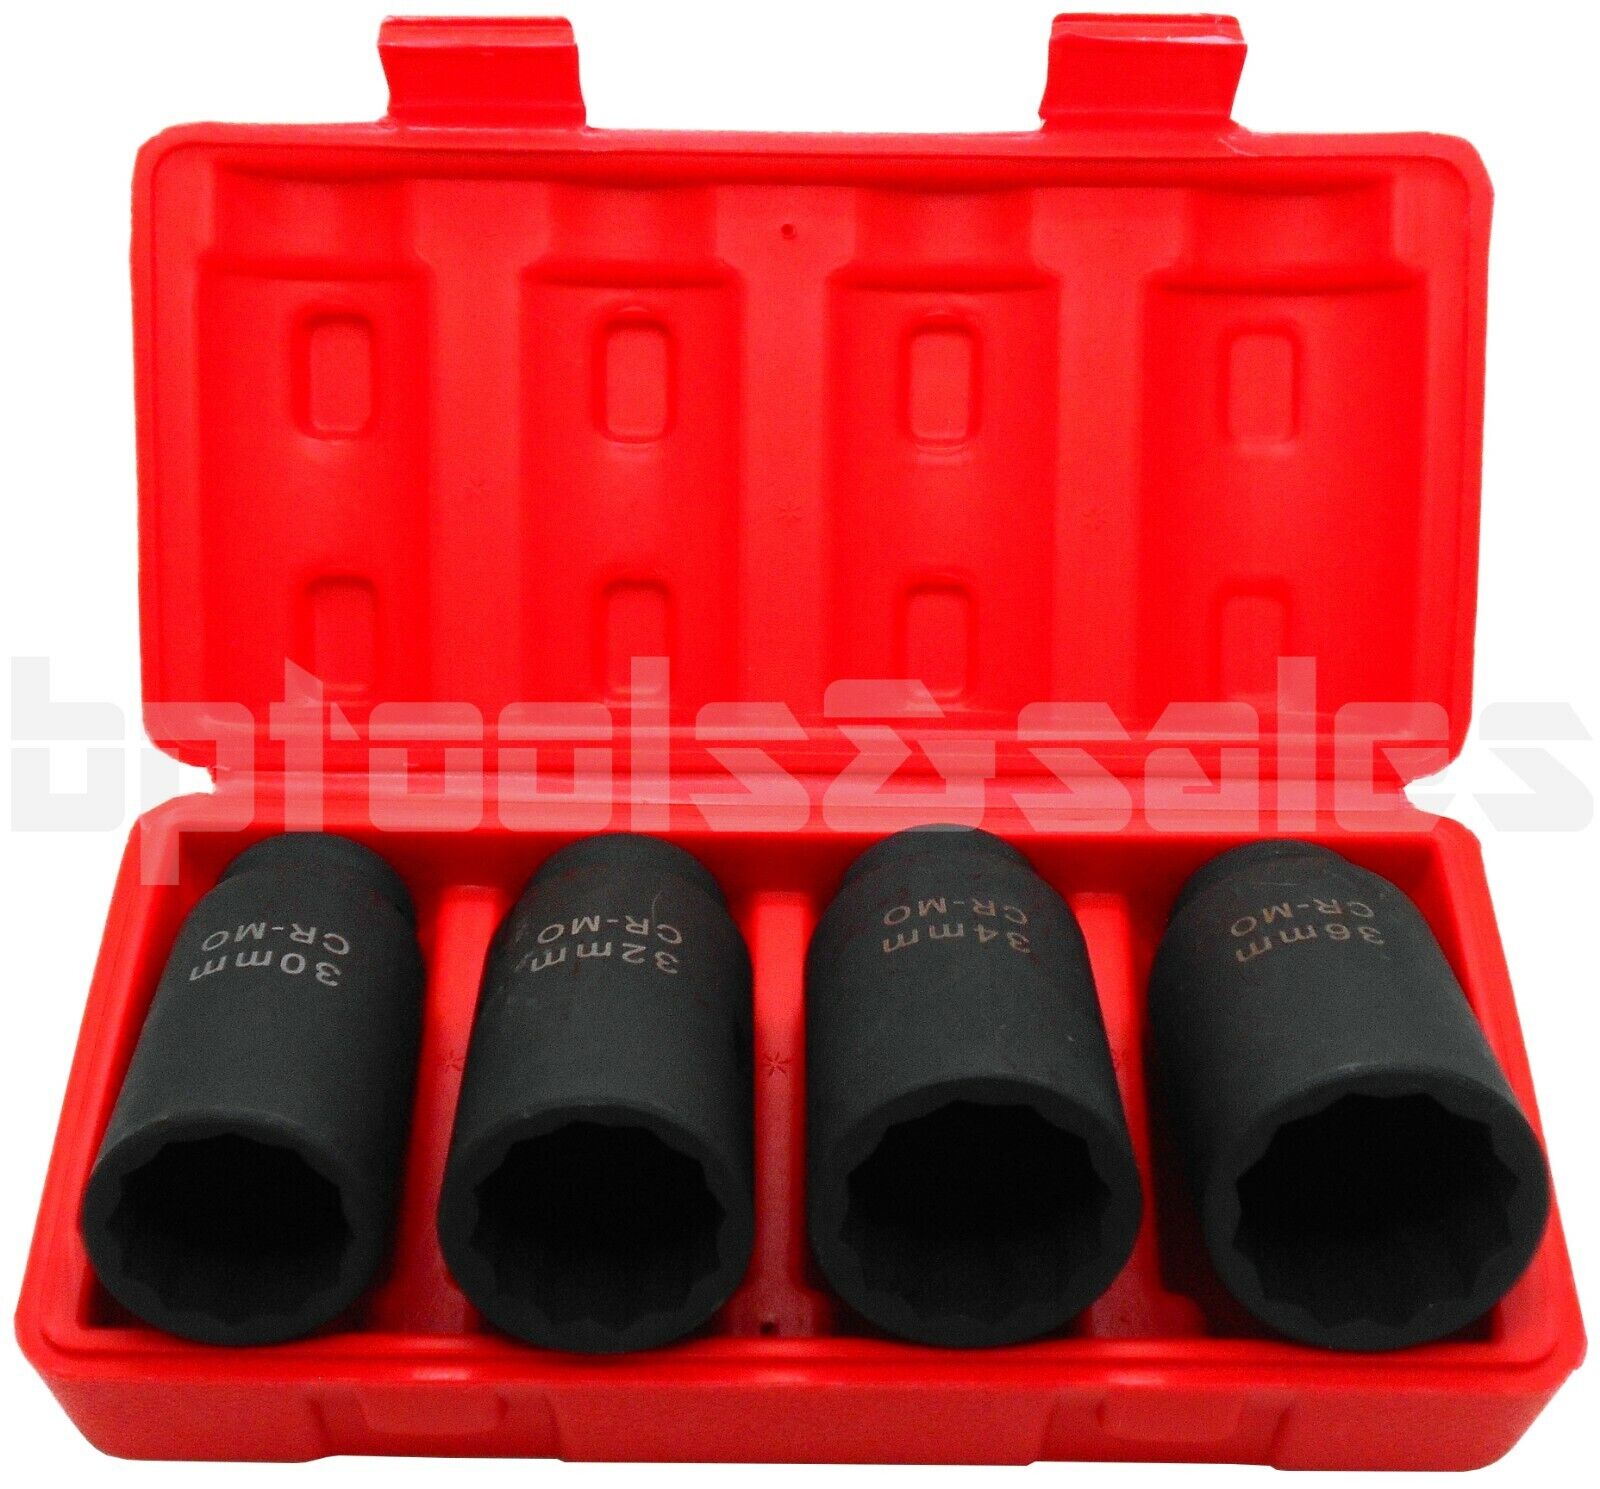 4pc 1/2" Dr Deep Spindle Axle Nut Socket Set 12 POINT METRIC 30mm 32mm 34mm 36mm